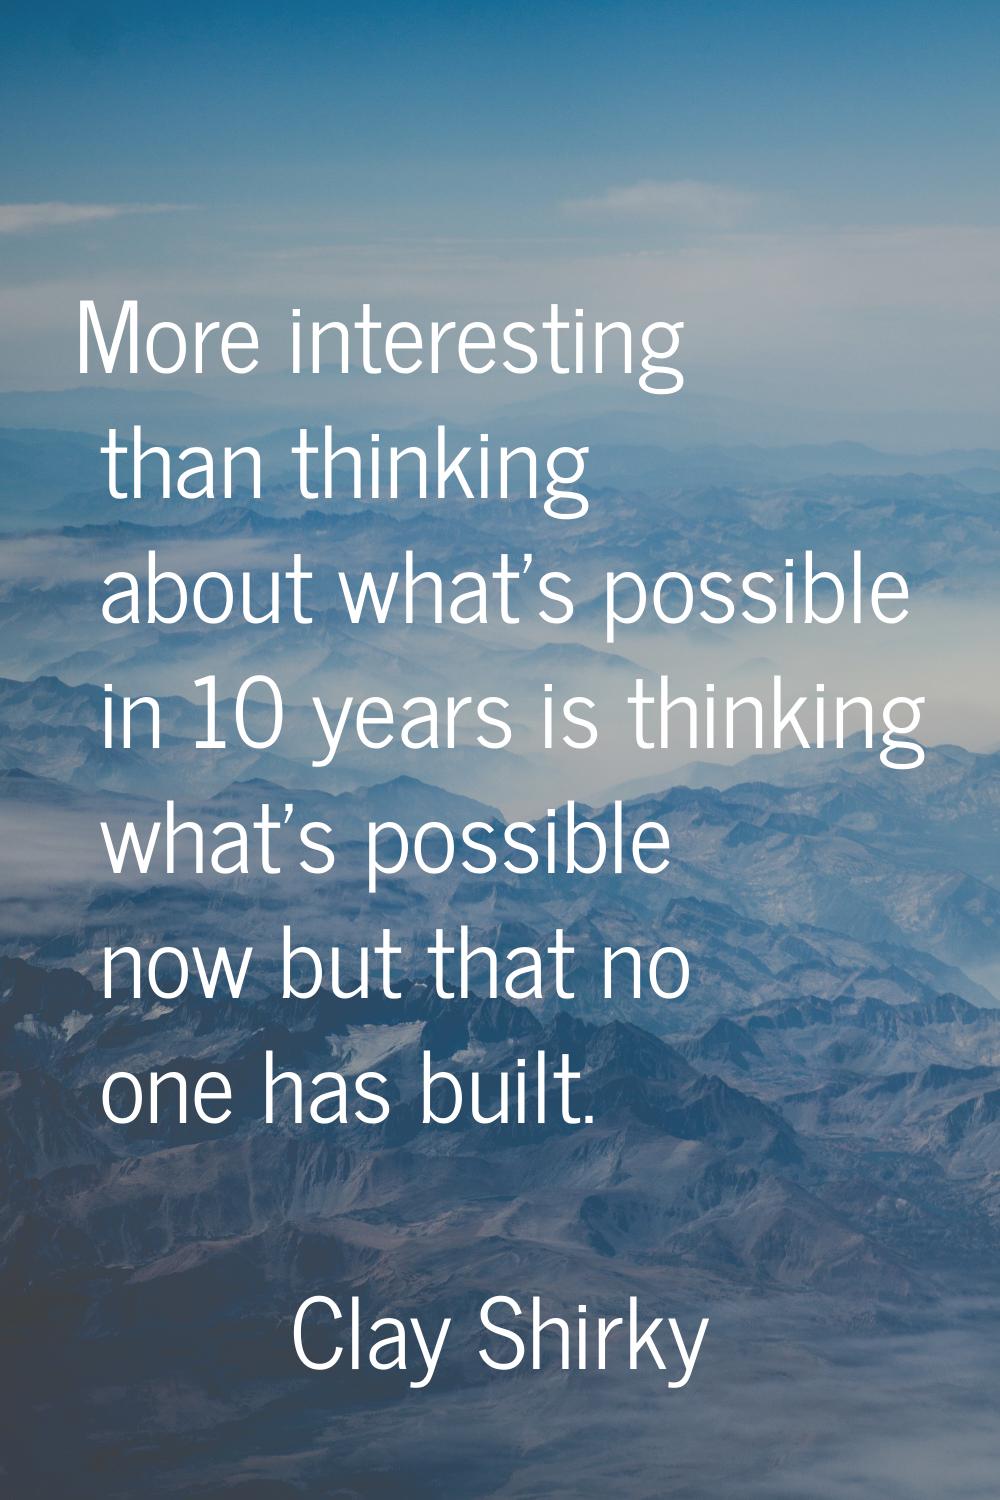 More interesting than thinking about what's possible in 10 years is thinking what's possible now bu